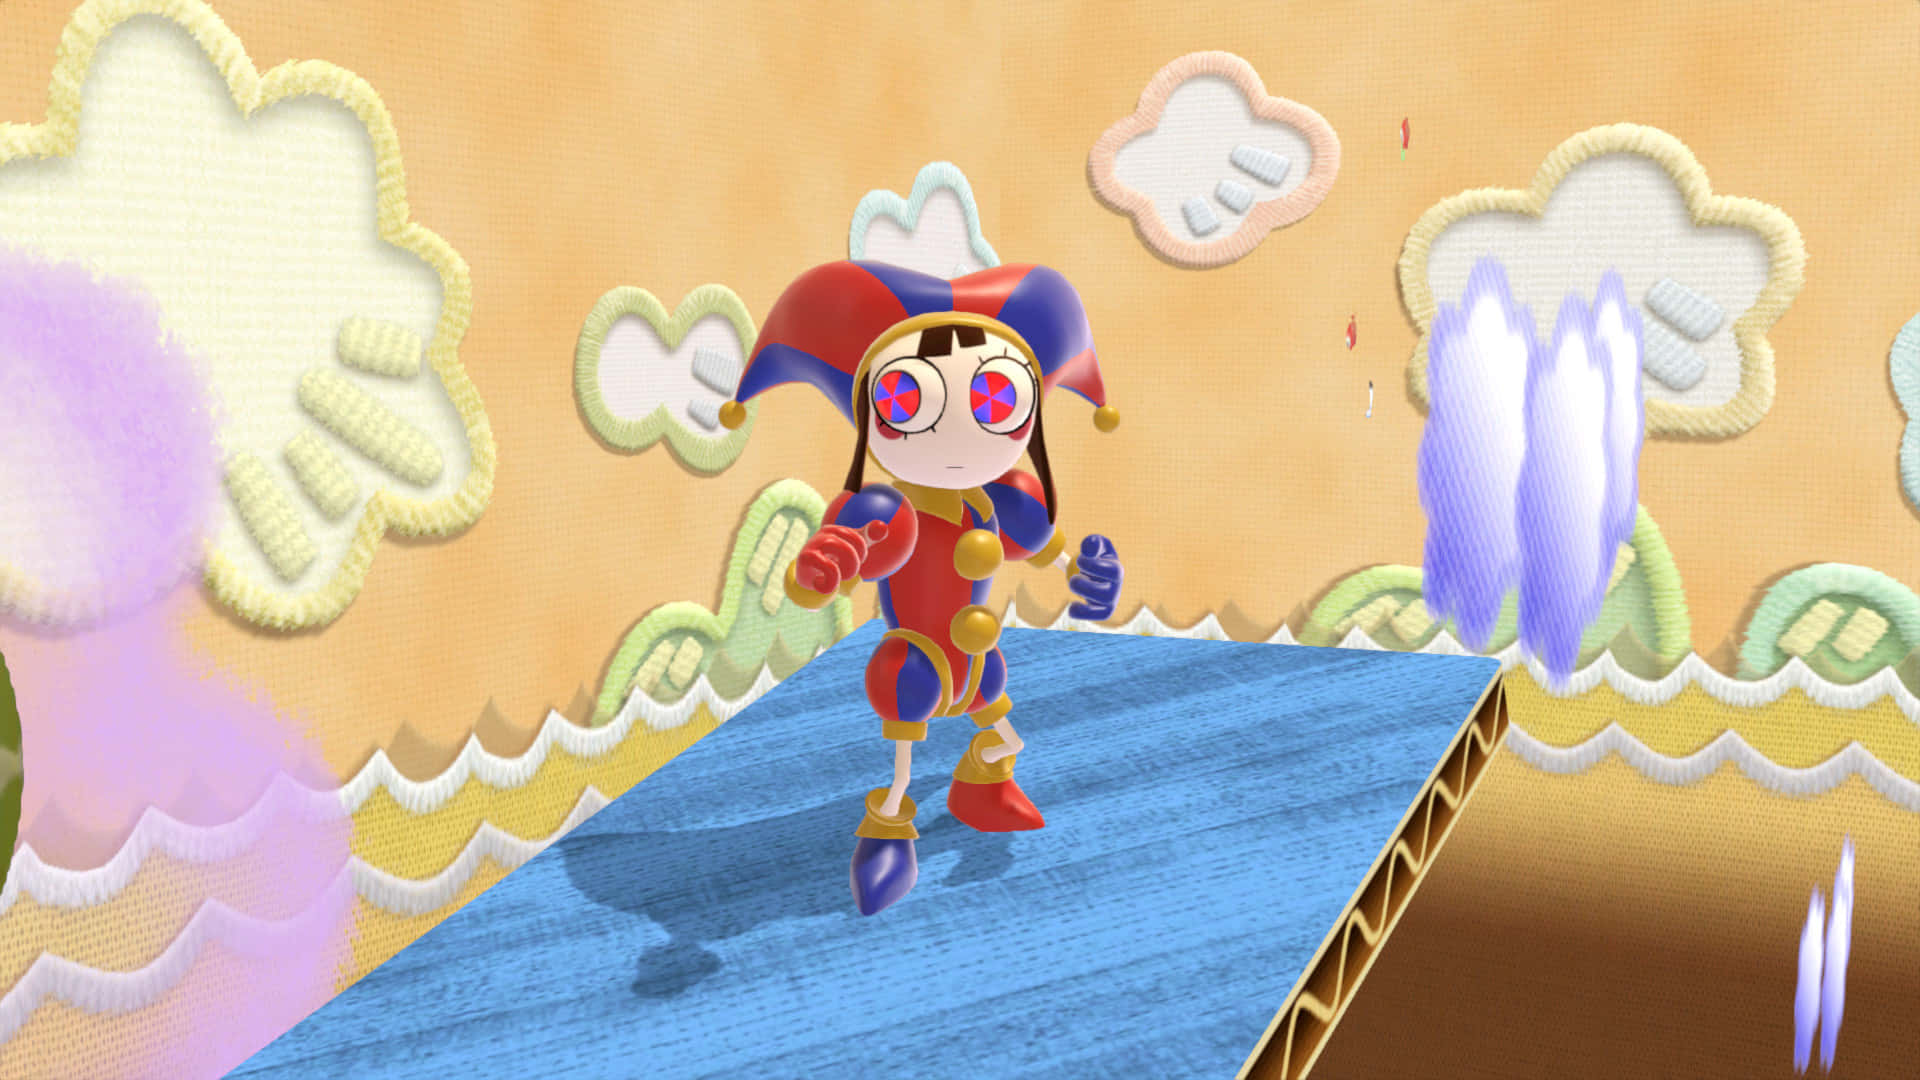 Animated Jester Character Adventure Wallpaper